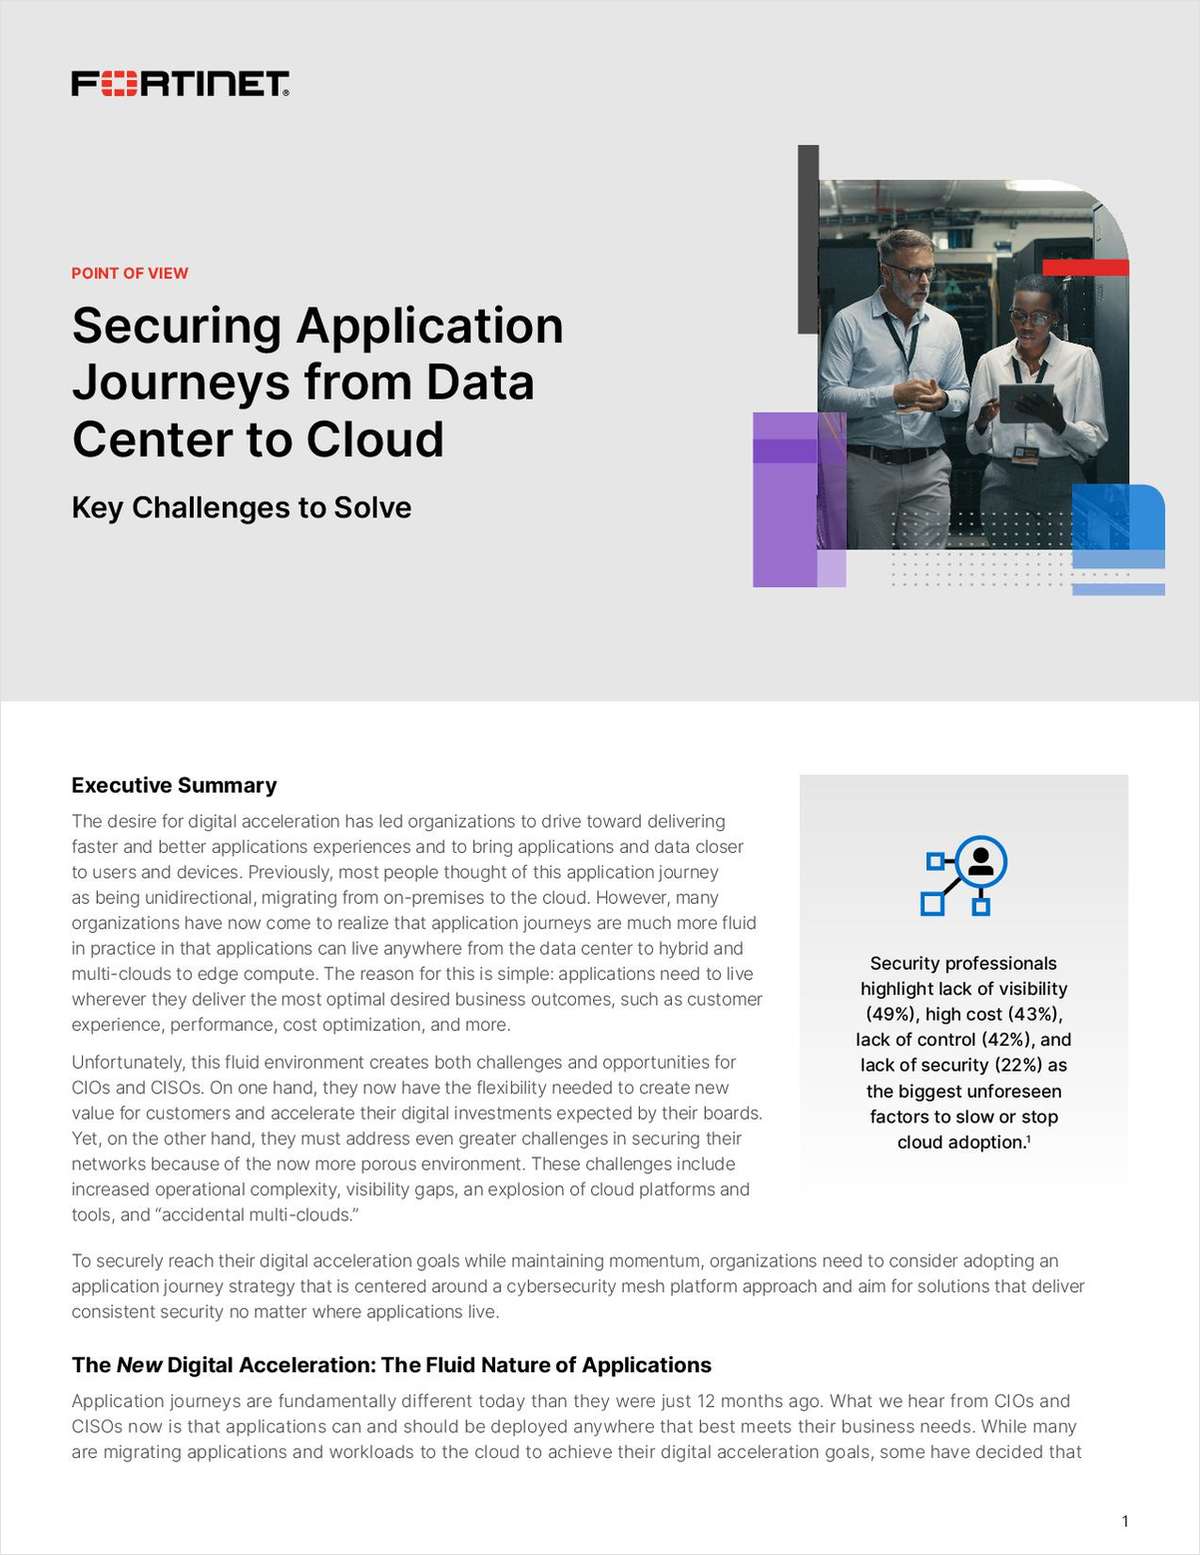 POV: Securing Application Journeys from Data Center to Cloud